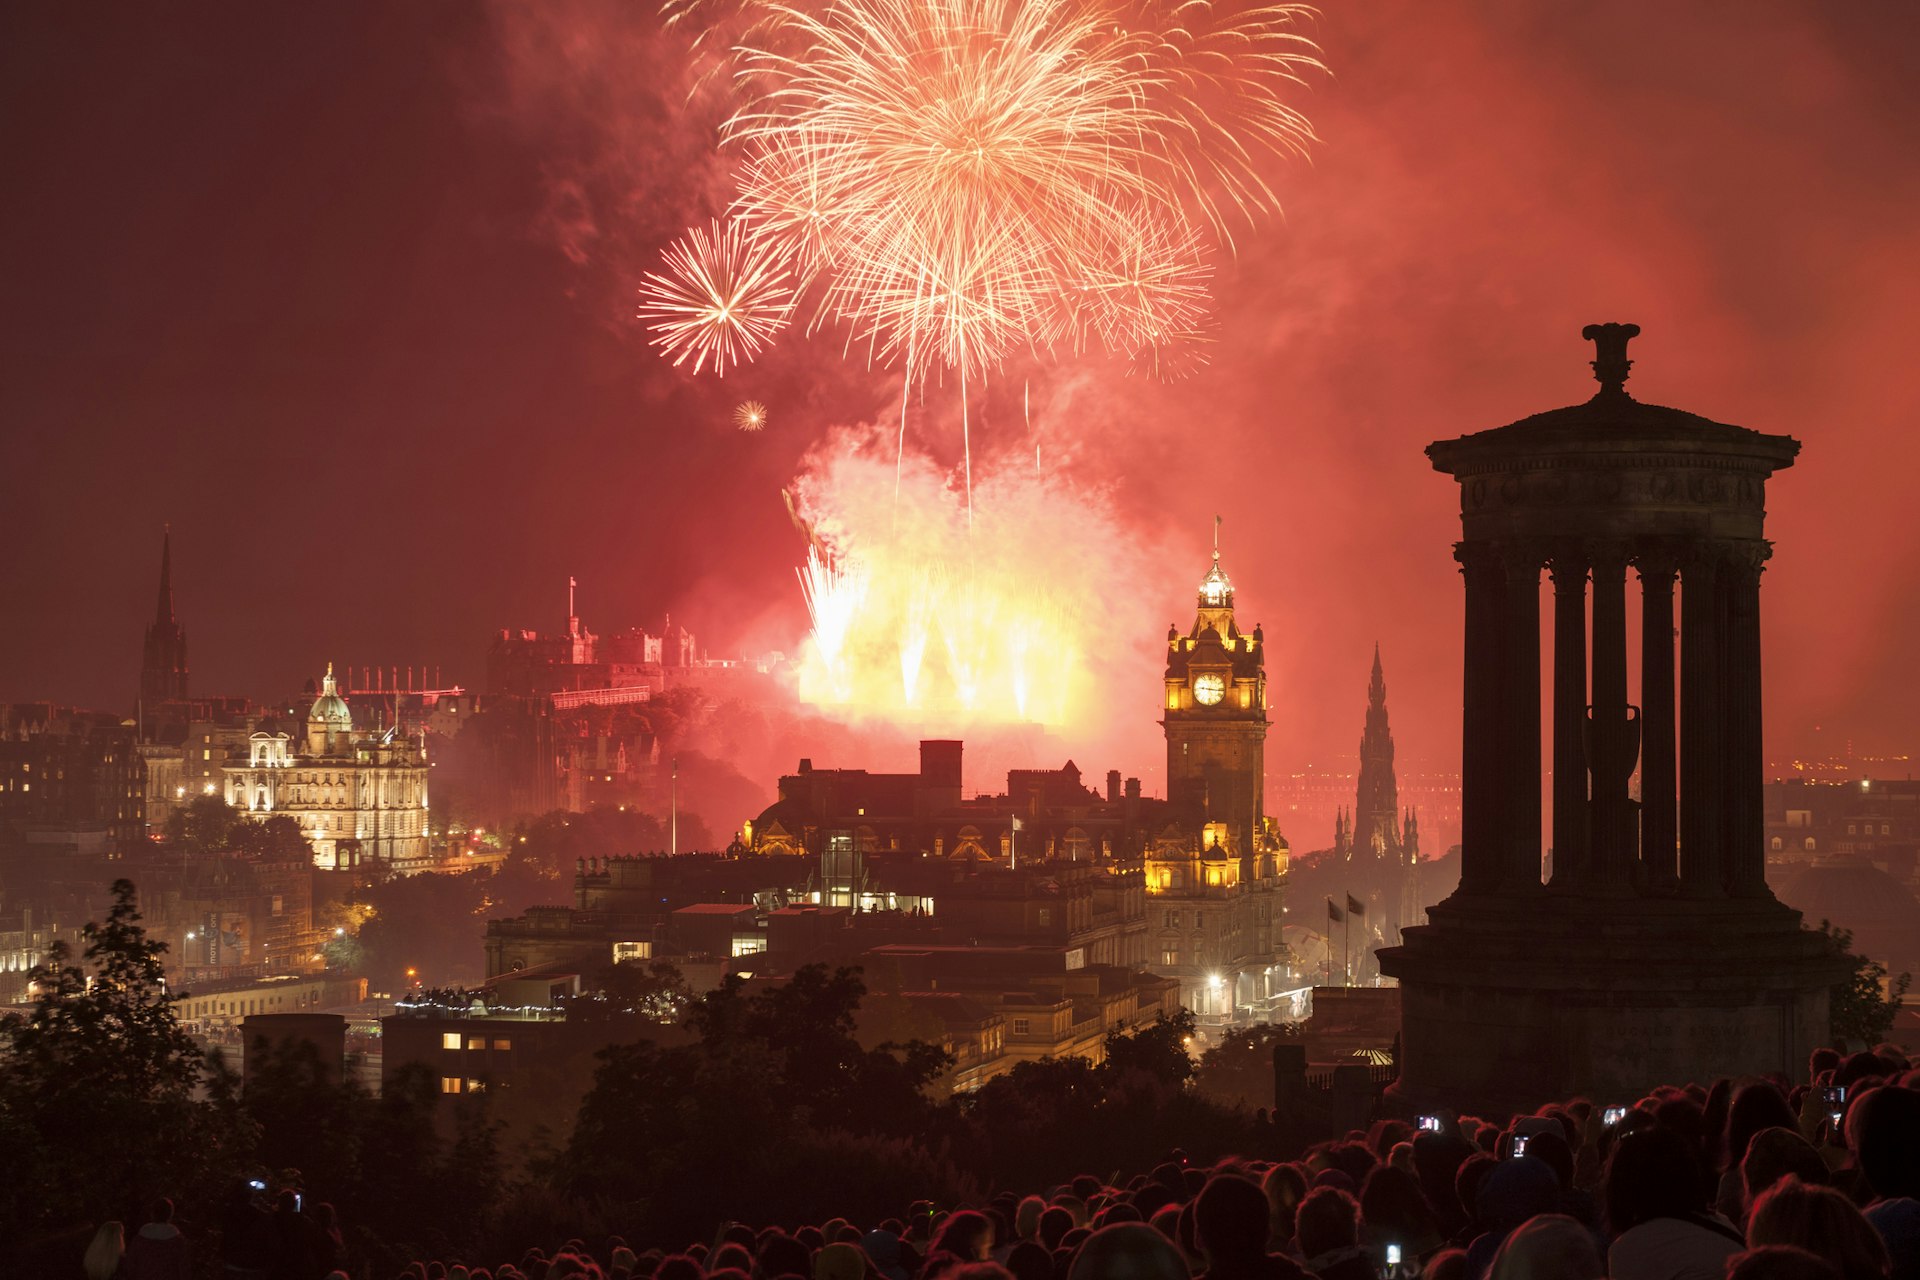 Edinburgh skyline from Calton Hill with annual end of the Festival fireworks display